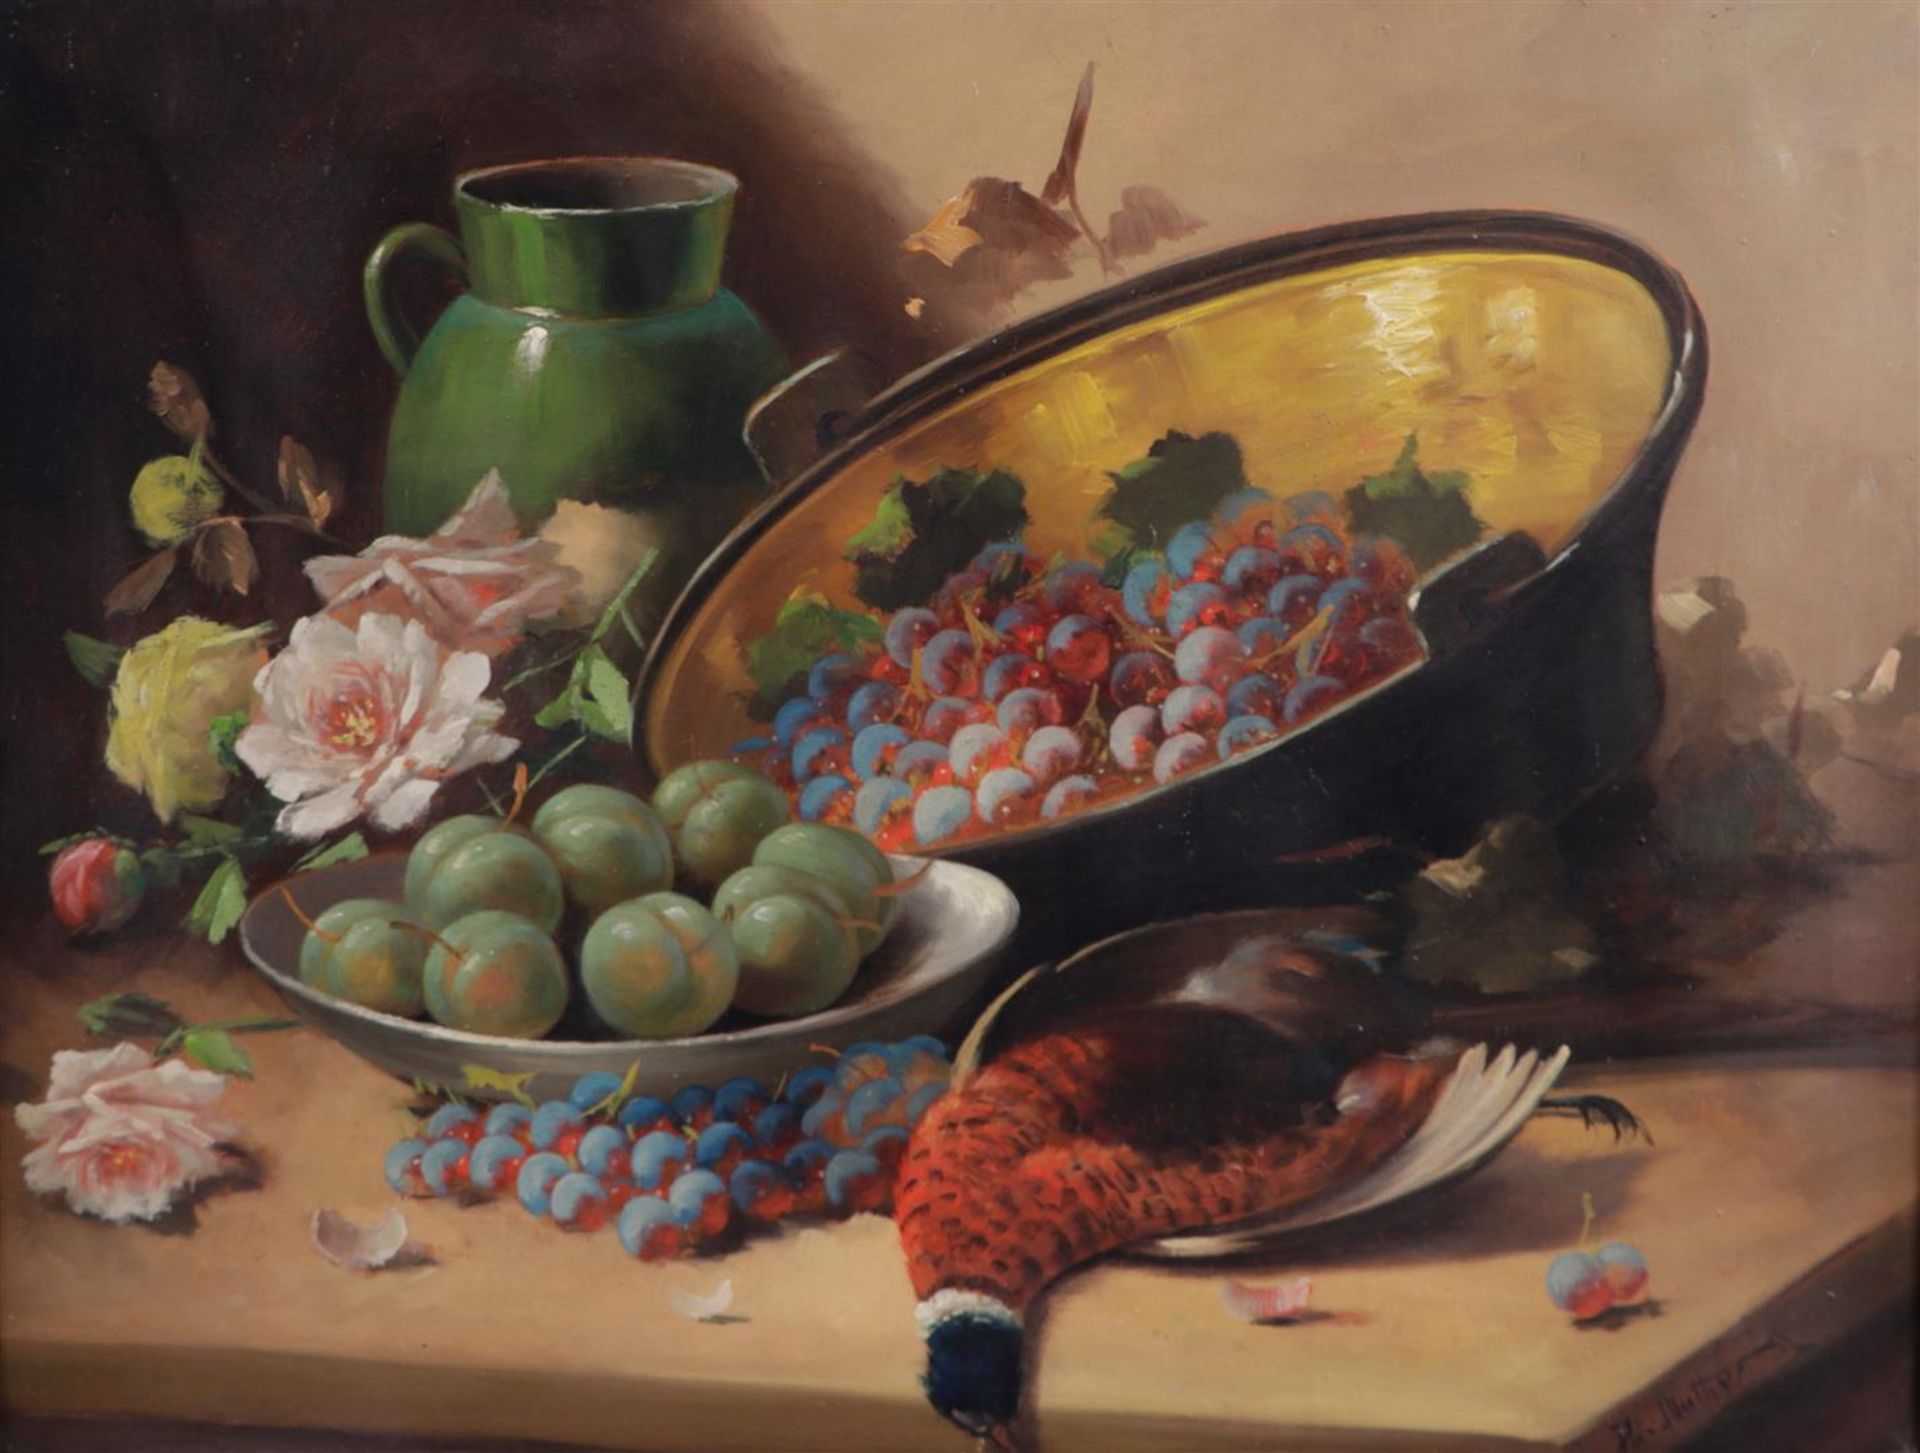 Beklgische School, ca, 1930, A still life with game, grapes and roses near a green jug, unclearly si